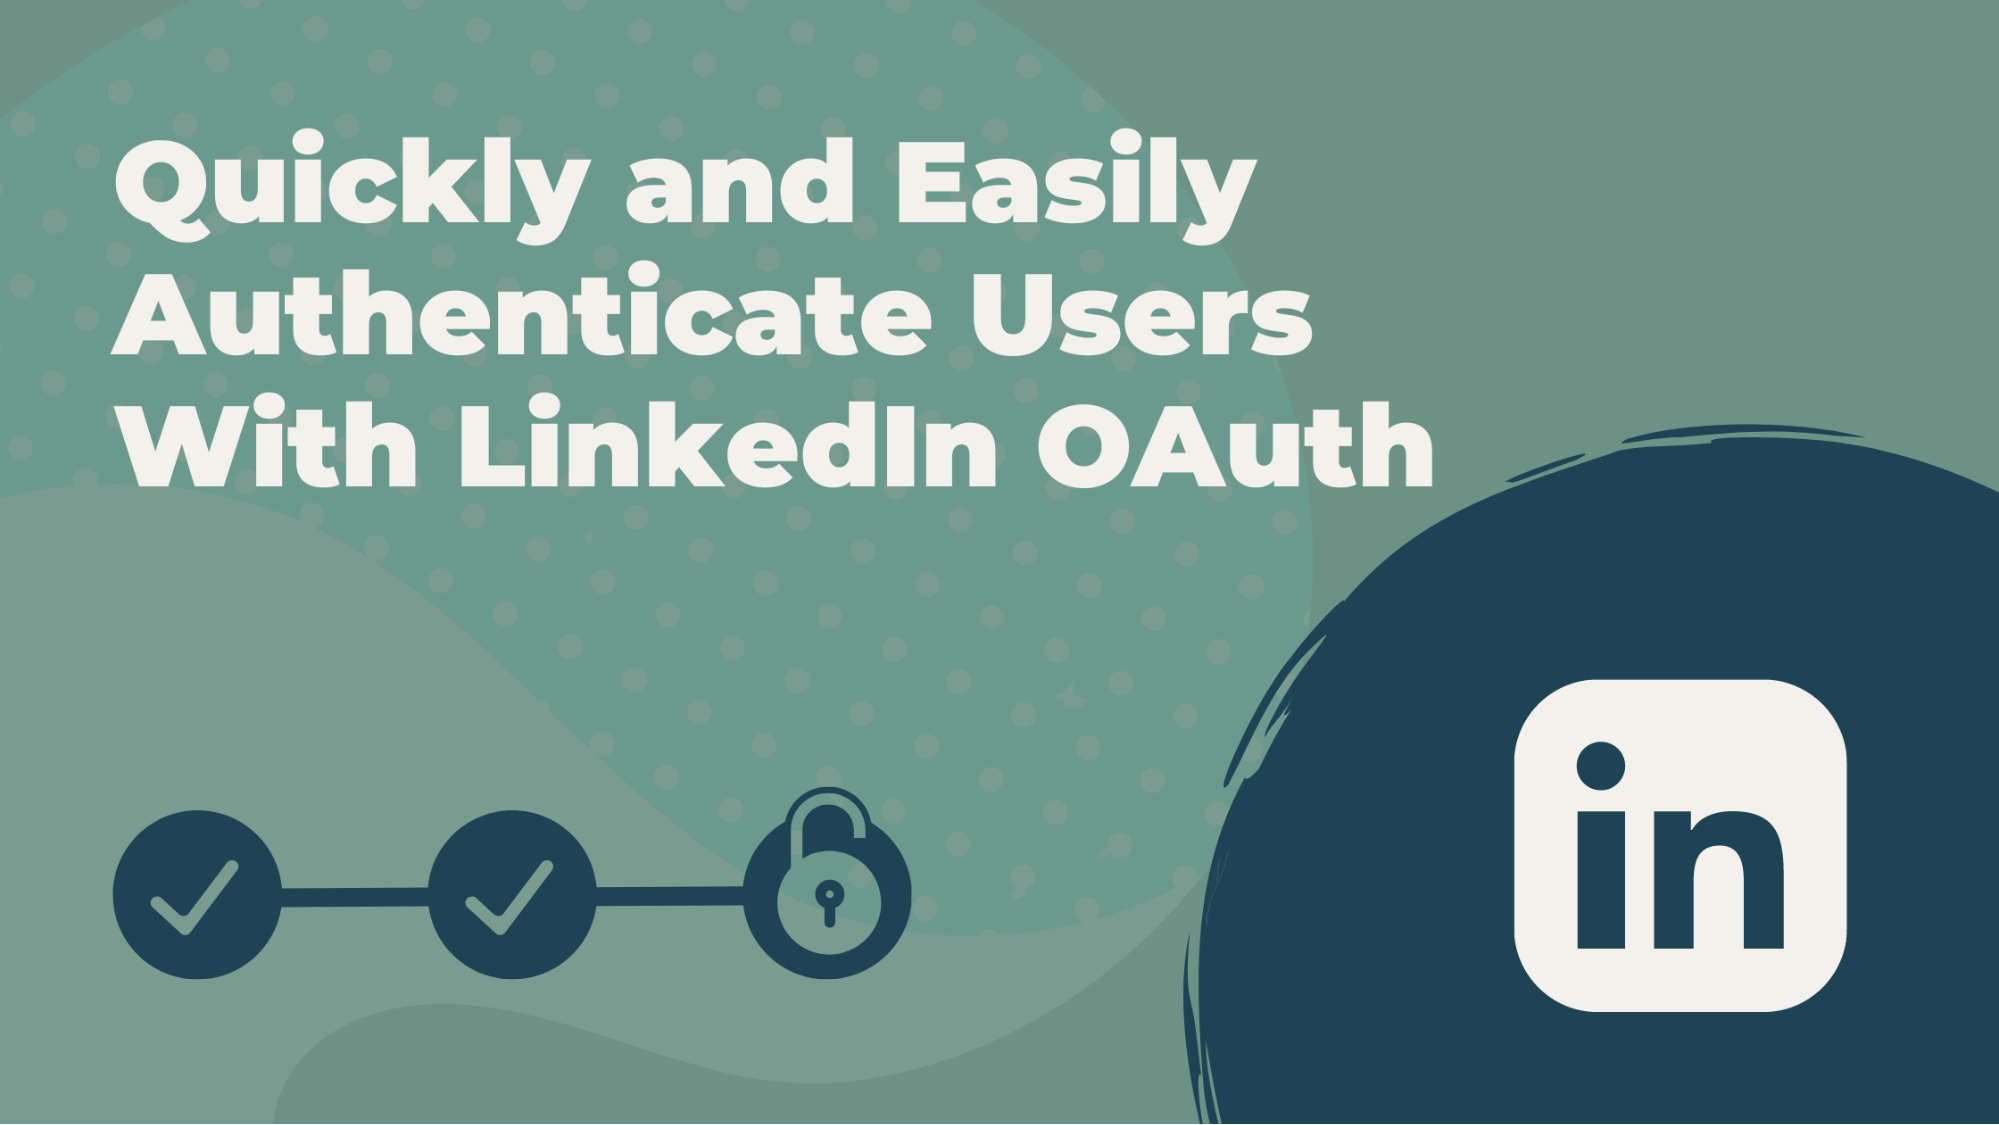 Quickly and Easily Authenticate Users With LinkedIn OAuth